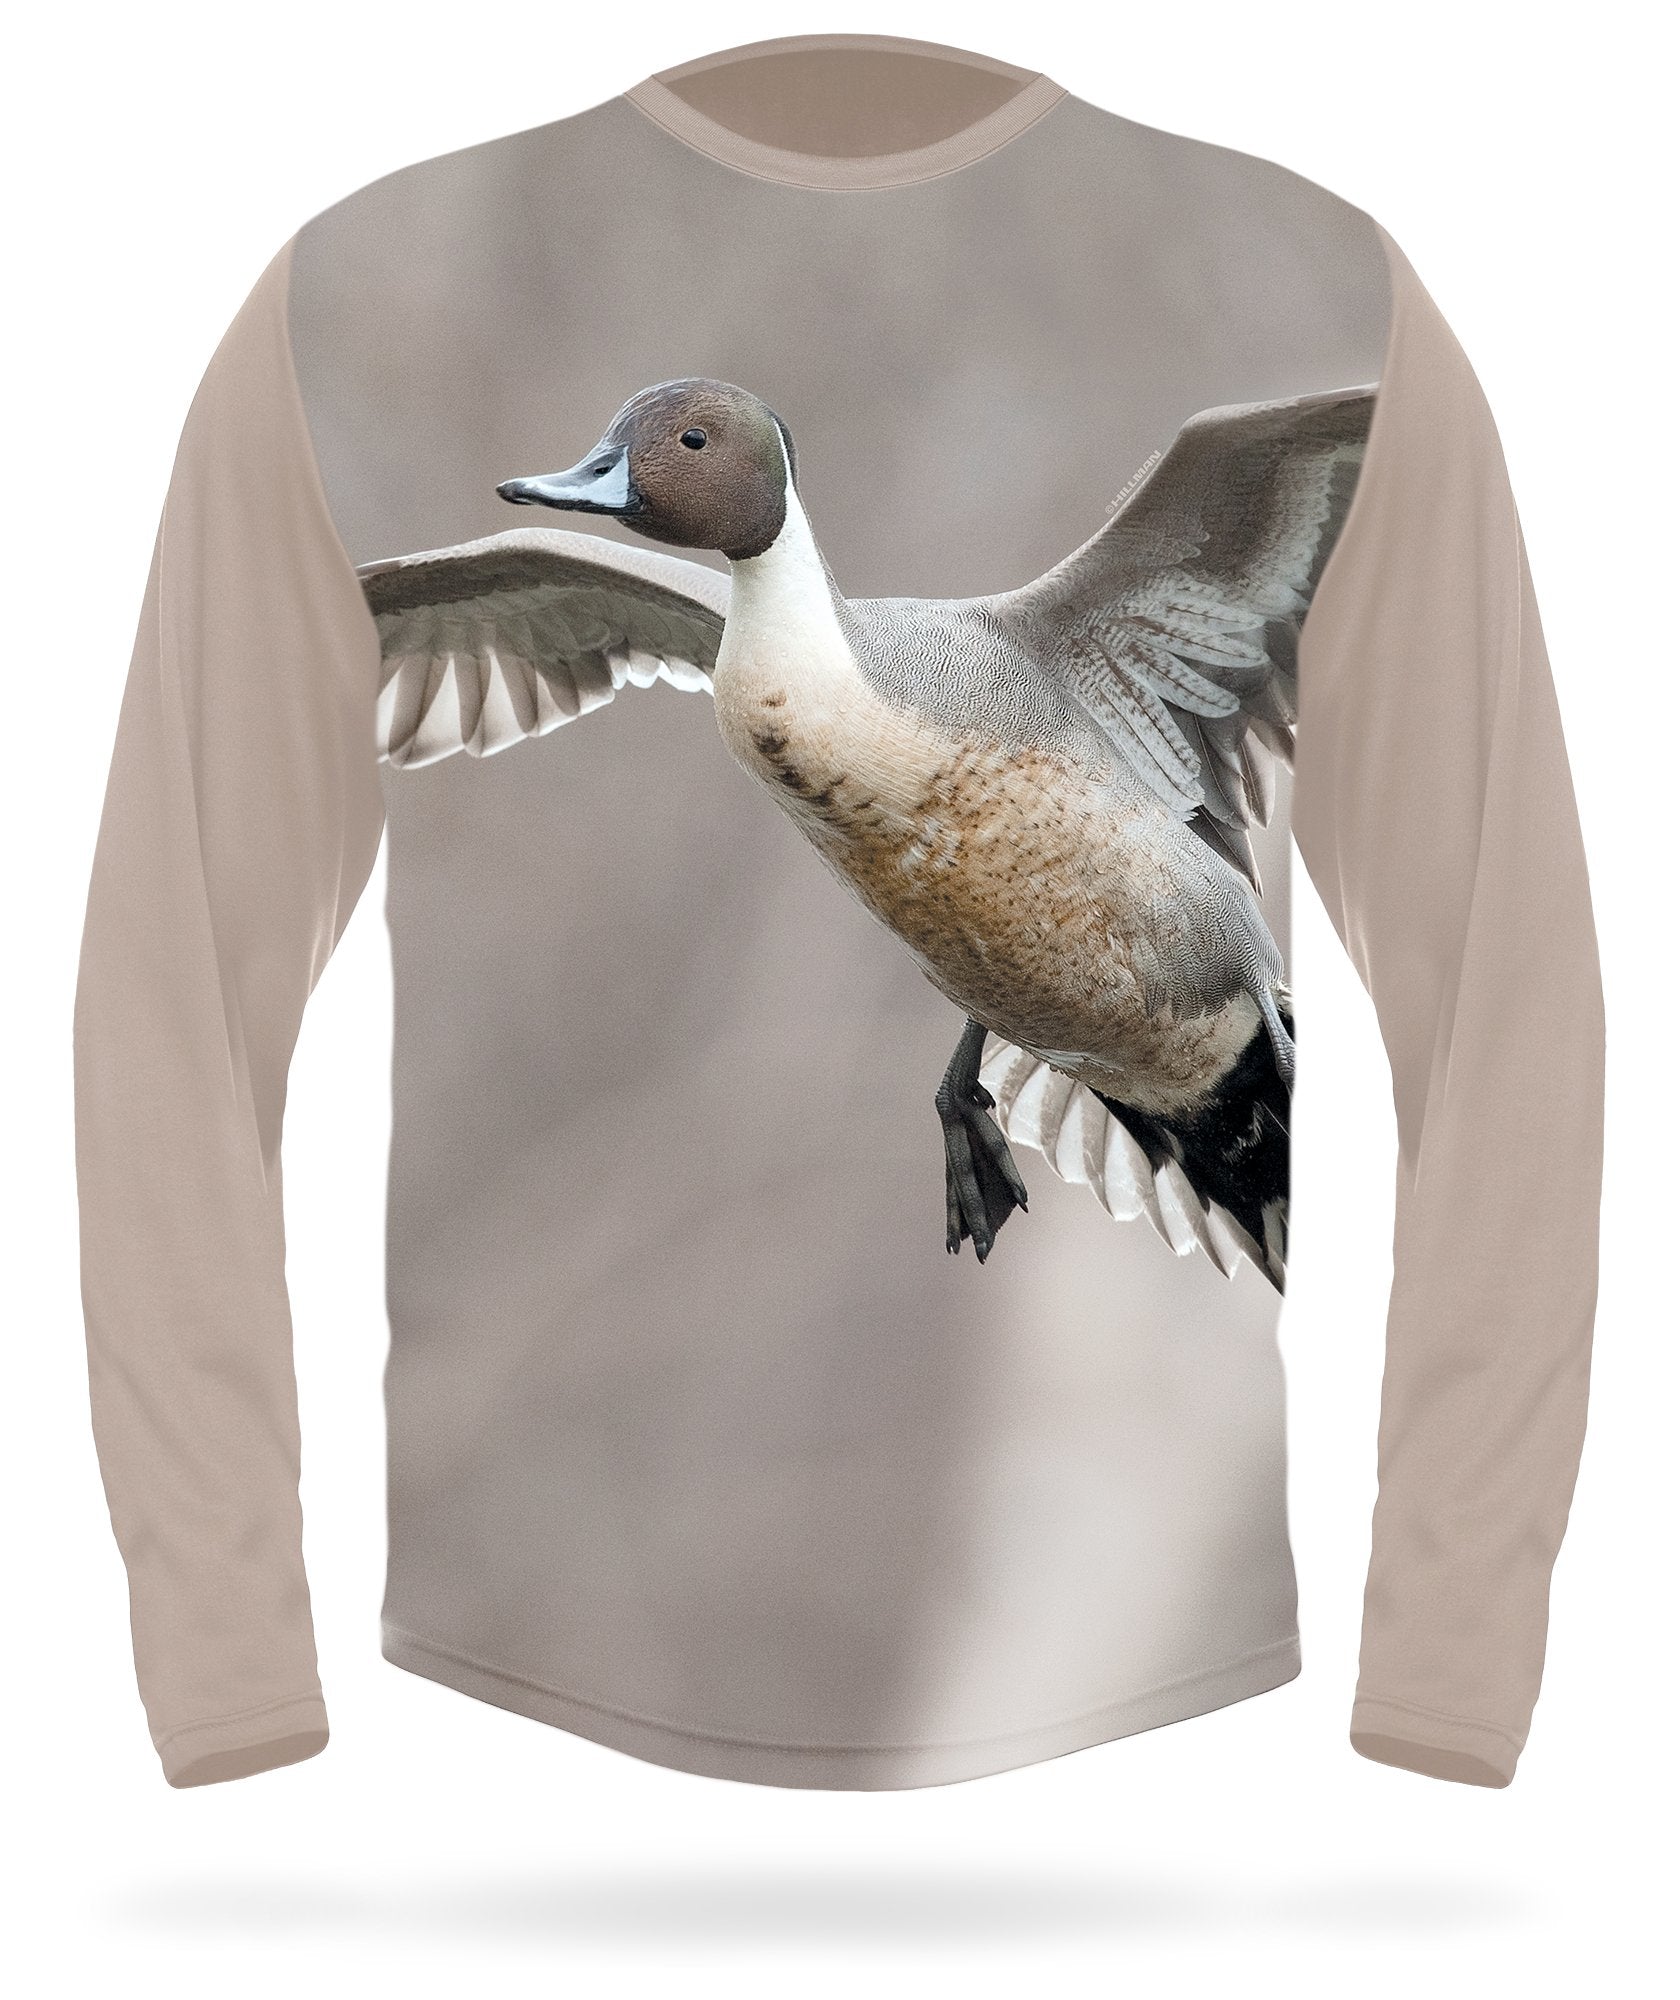 Long sleeve NORTHERN PINTAIL